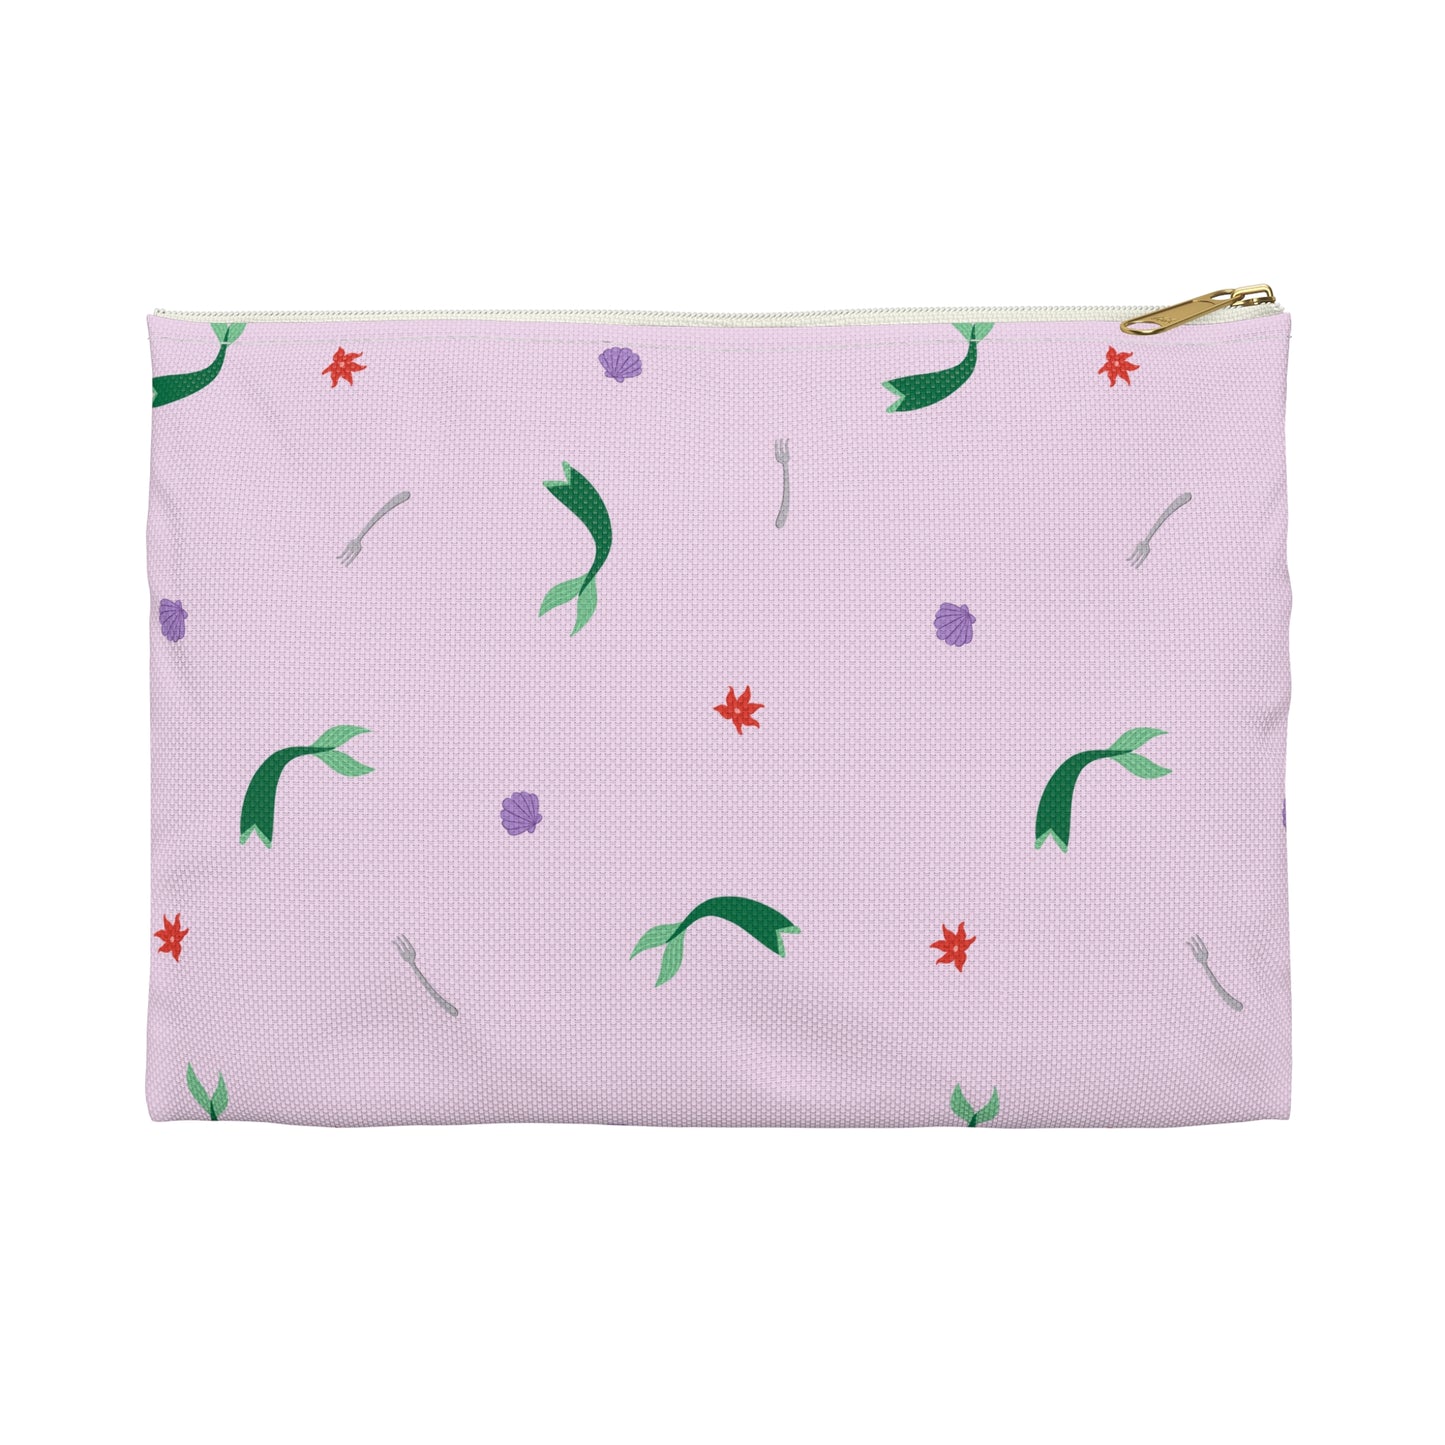 Ariel's Favorite Things - Little Mermaid Inspired - Accessory Pouch